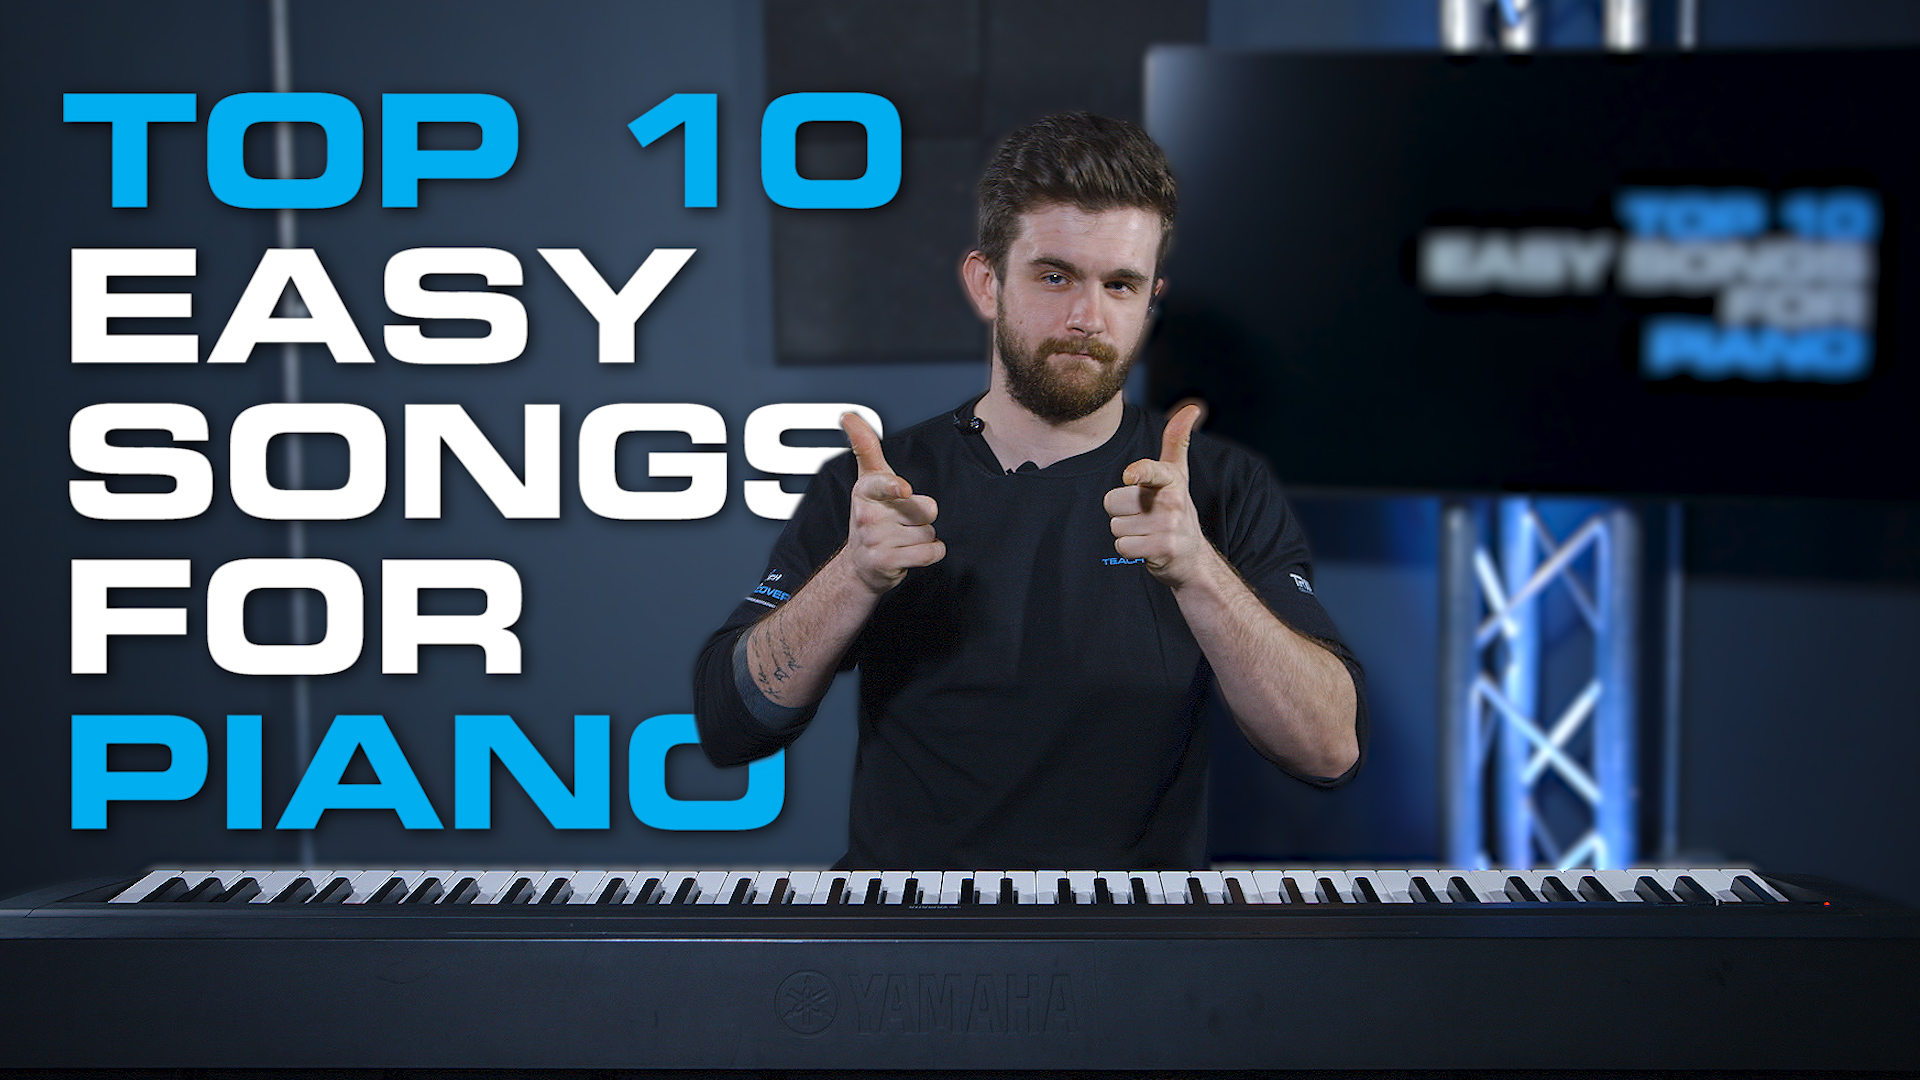 TOP 10 Easy Songs For Piano